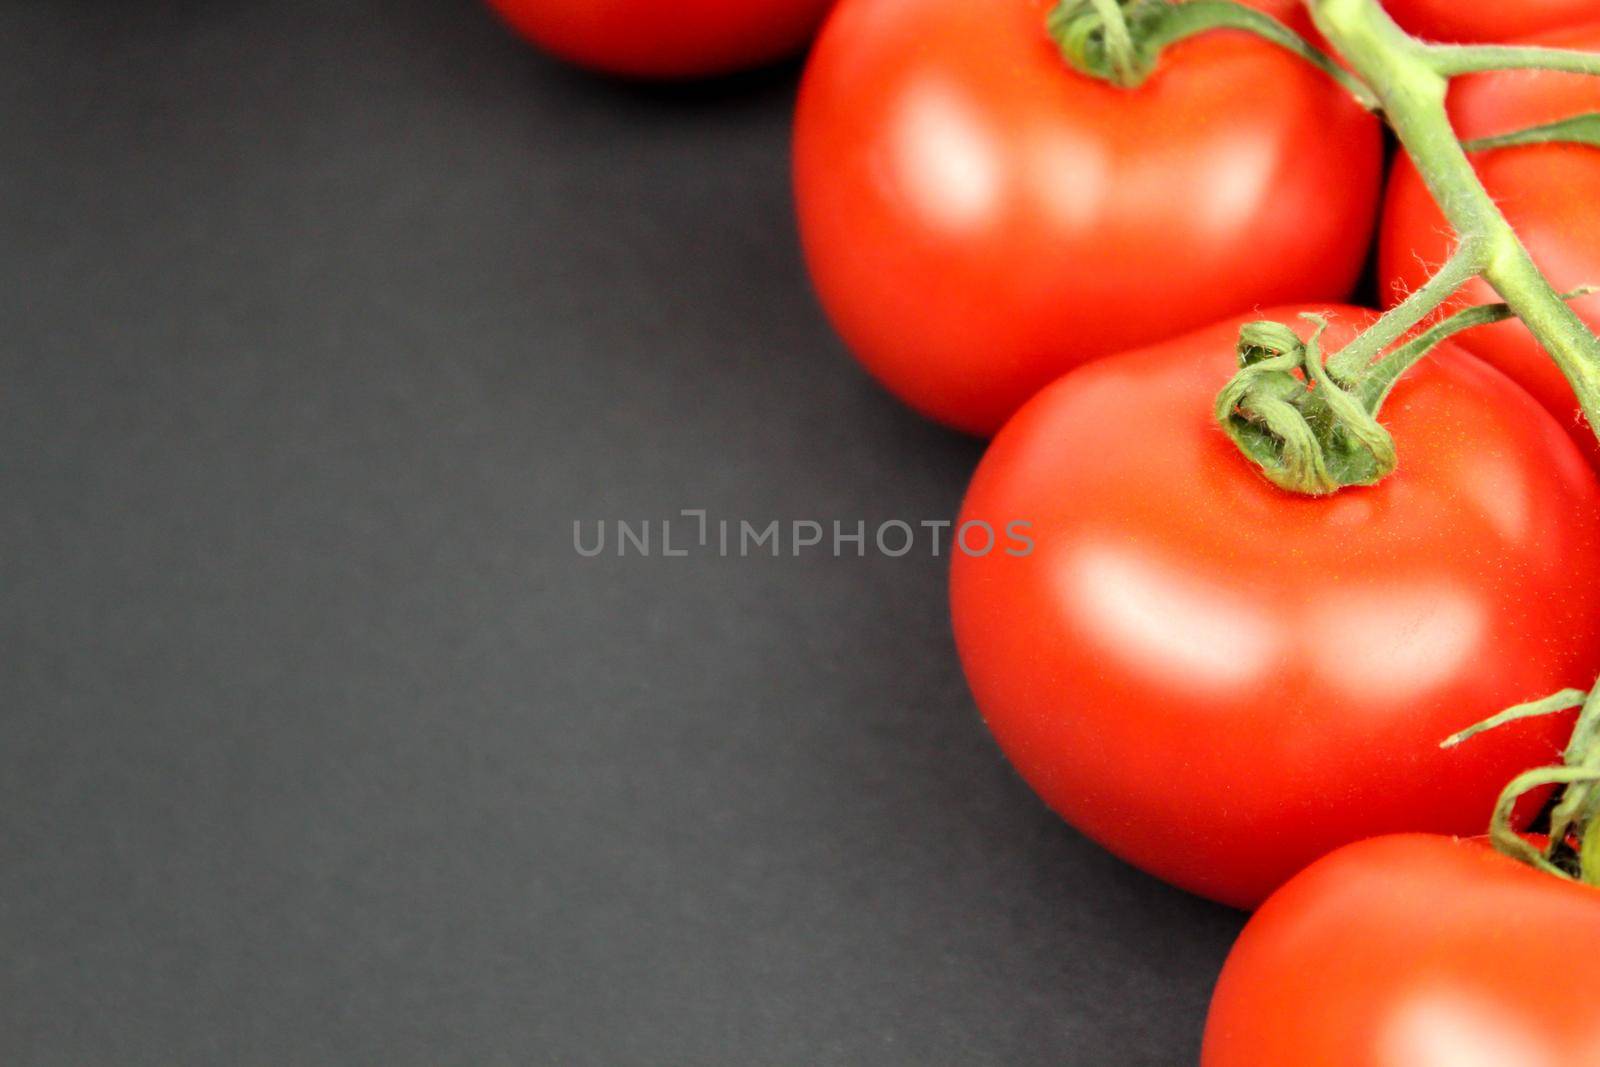 Red tomatoes on black background with water drops by JuliaDorian